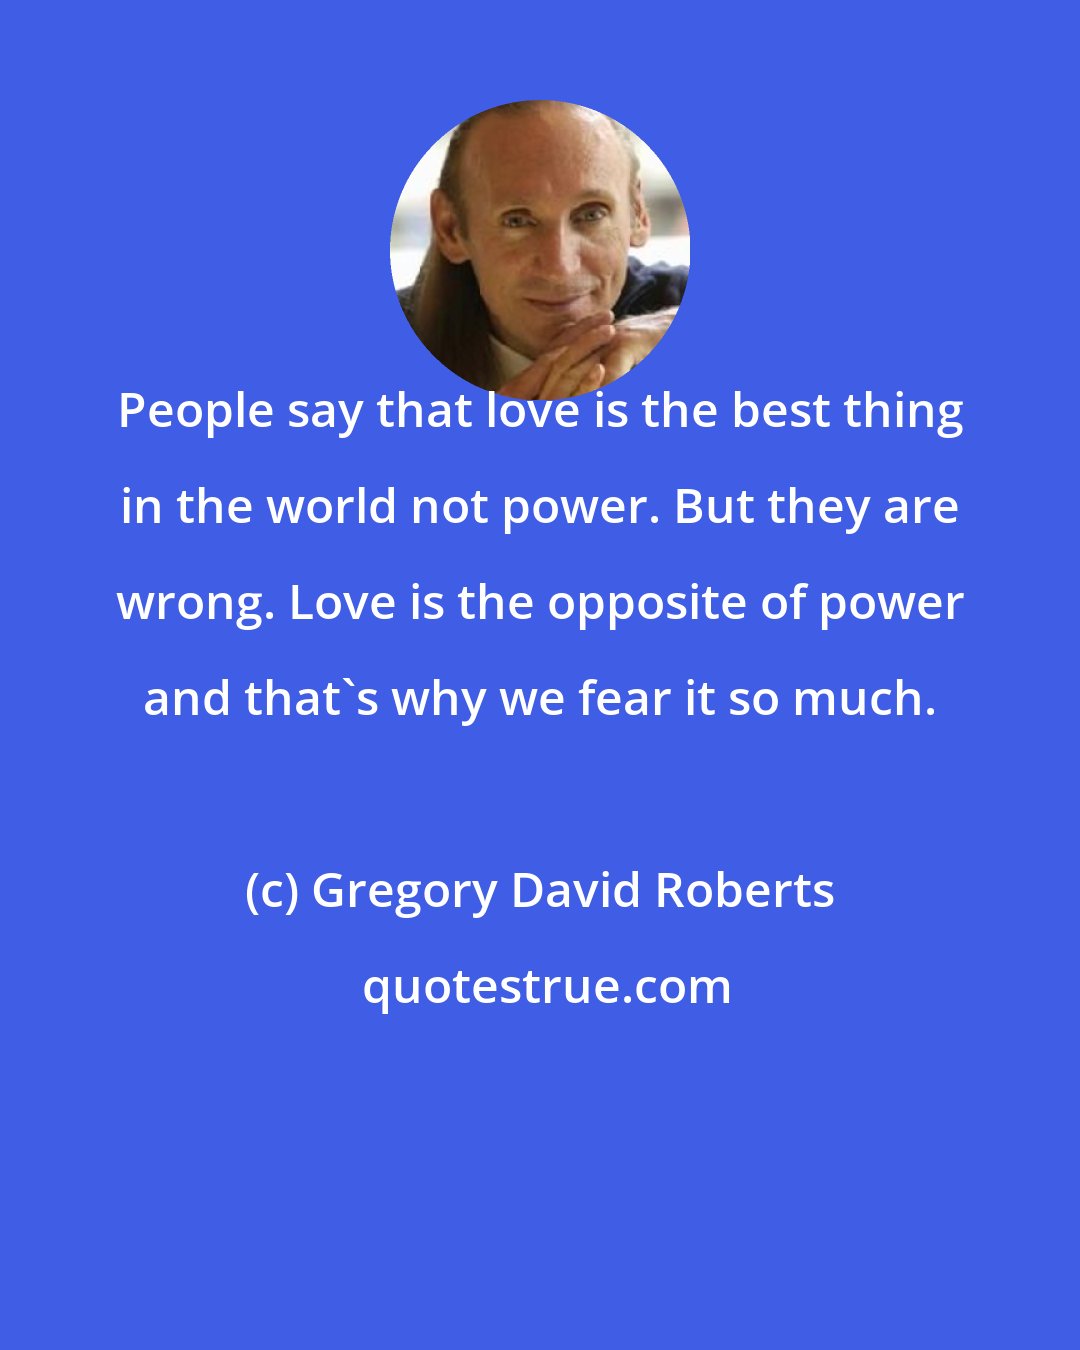 Gregory David Roberts: People say that love is the best thing in the world not power. But they are wrong. Love is the opposite of power and that's why we fear it so much.